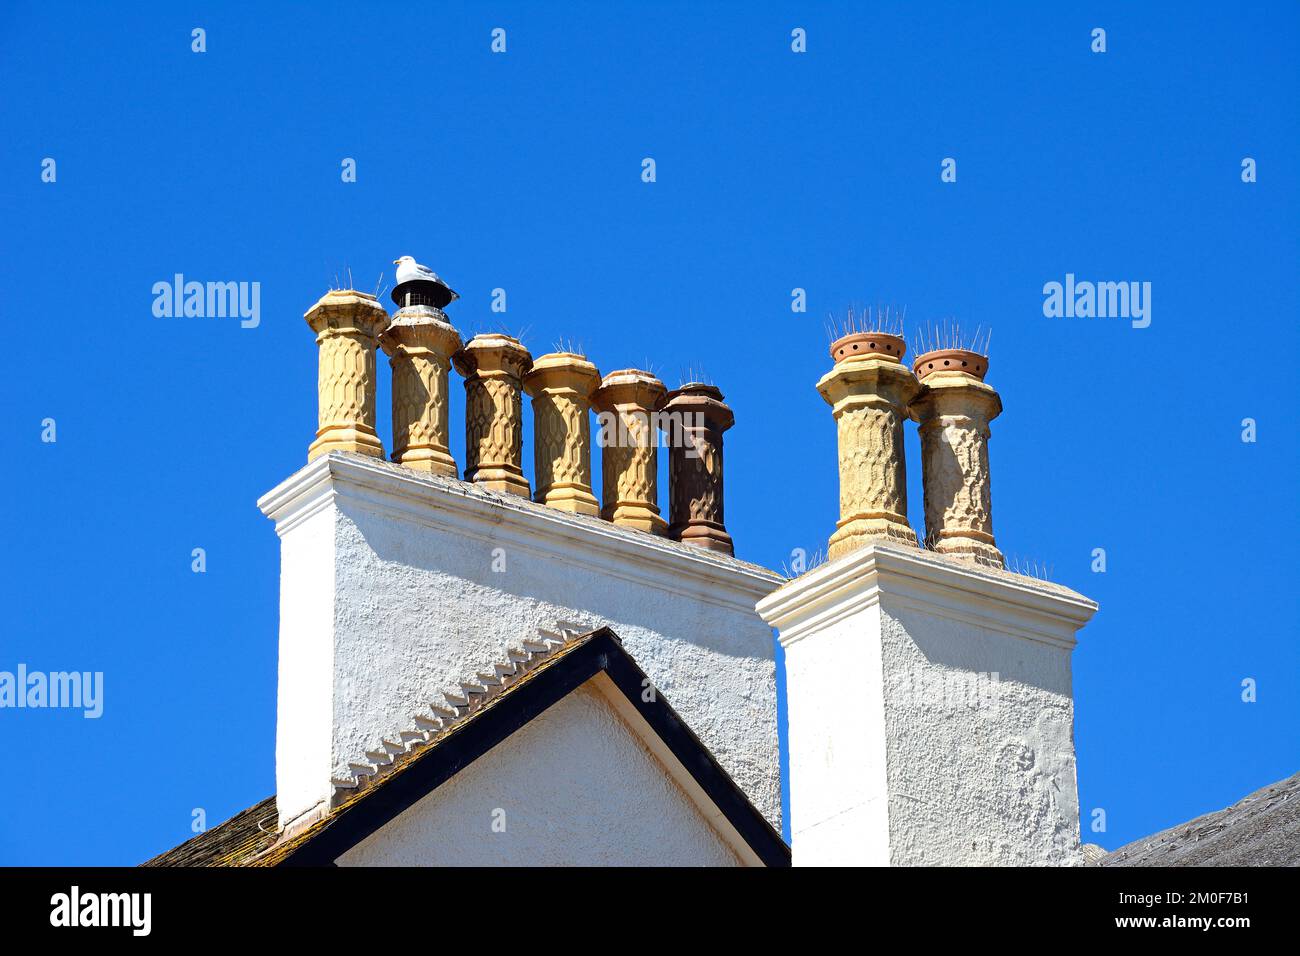 View of a Seagull sitting atop an interesting chimney on a building along the seafront, Sidmouth, Devon, UK, Europe Stock Photo